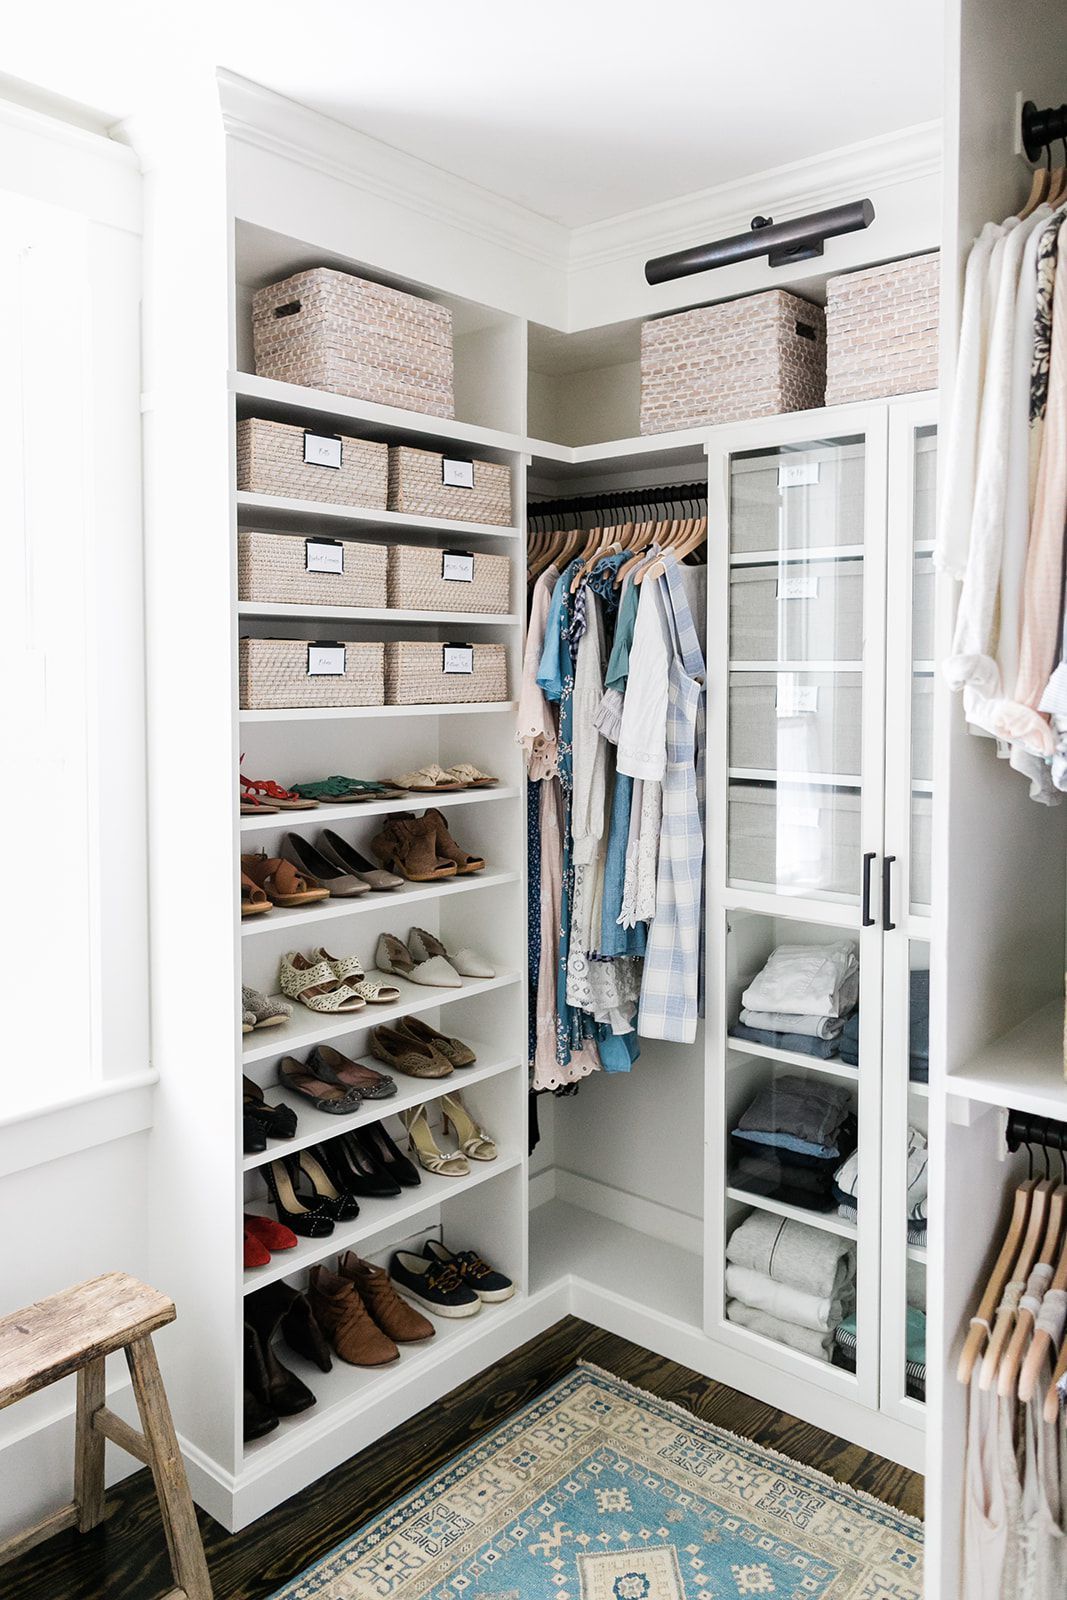 Ikea Closet Systems: What To Buy & How To Install Throughout Wardrobes Drawers And Shelves Ikea (View 12 of 15)